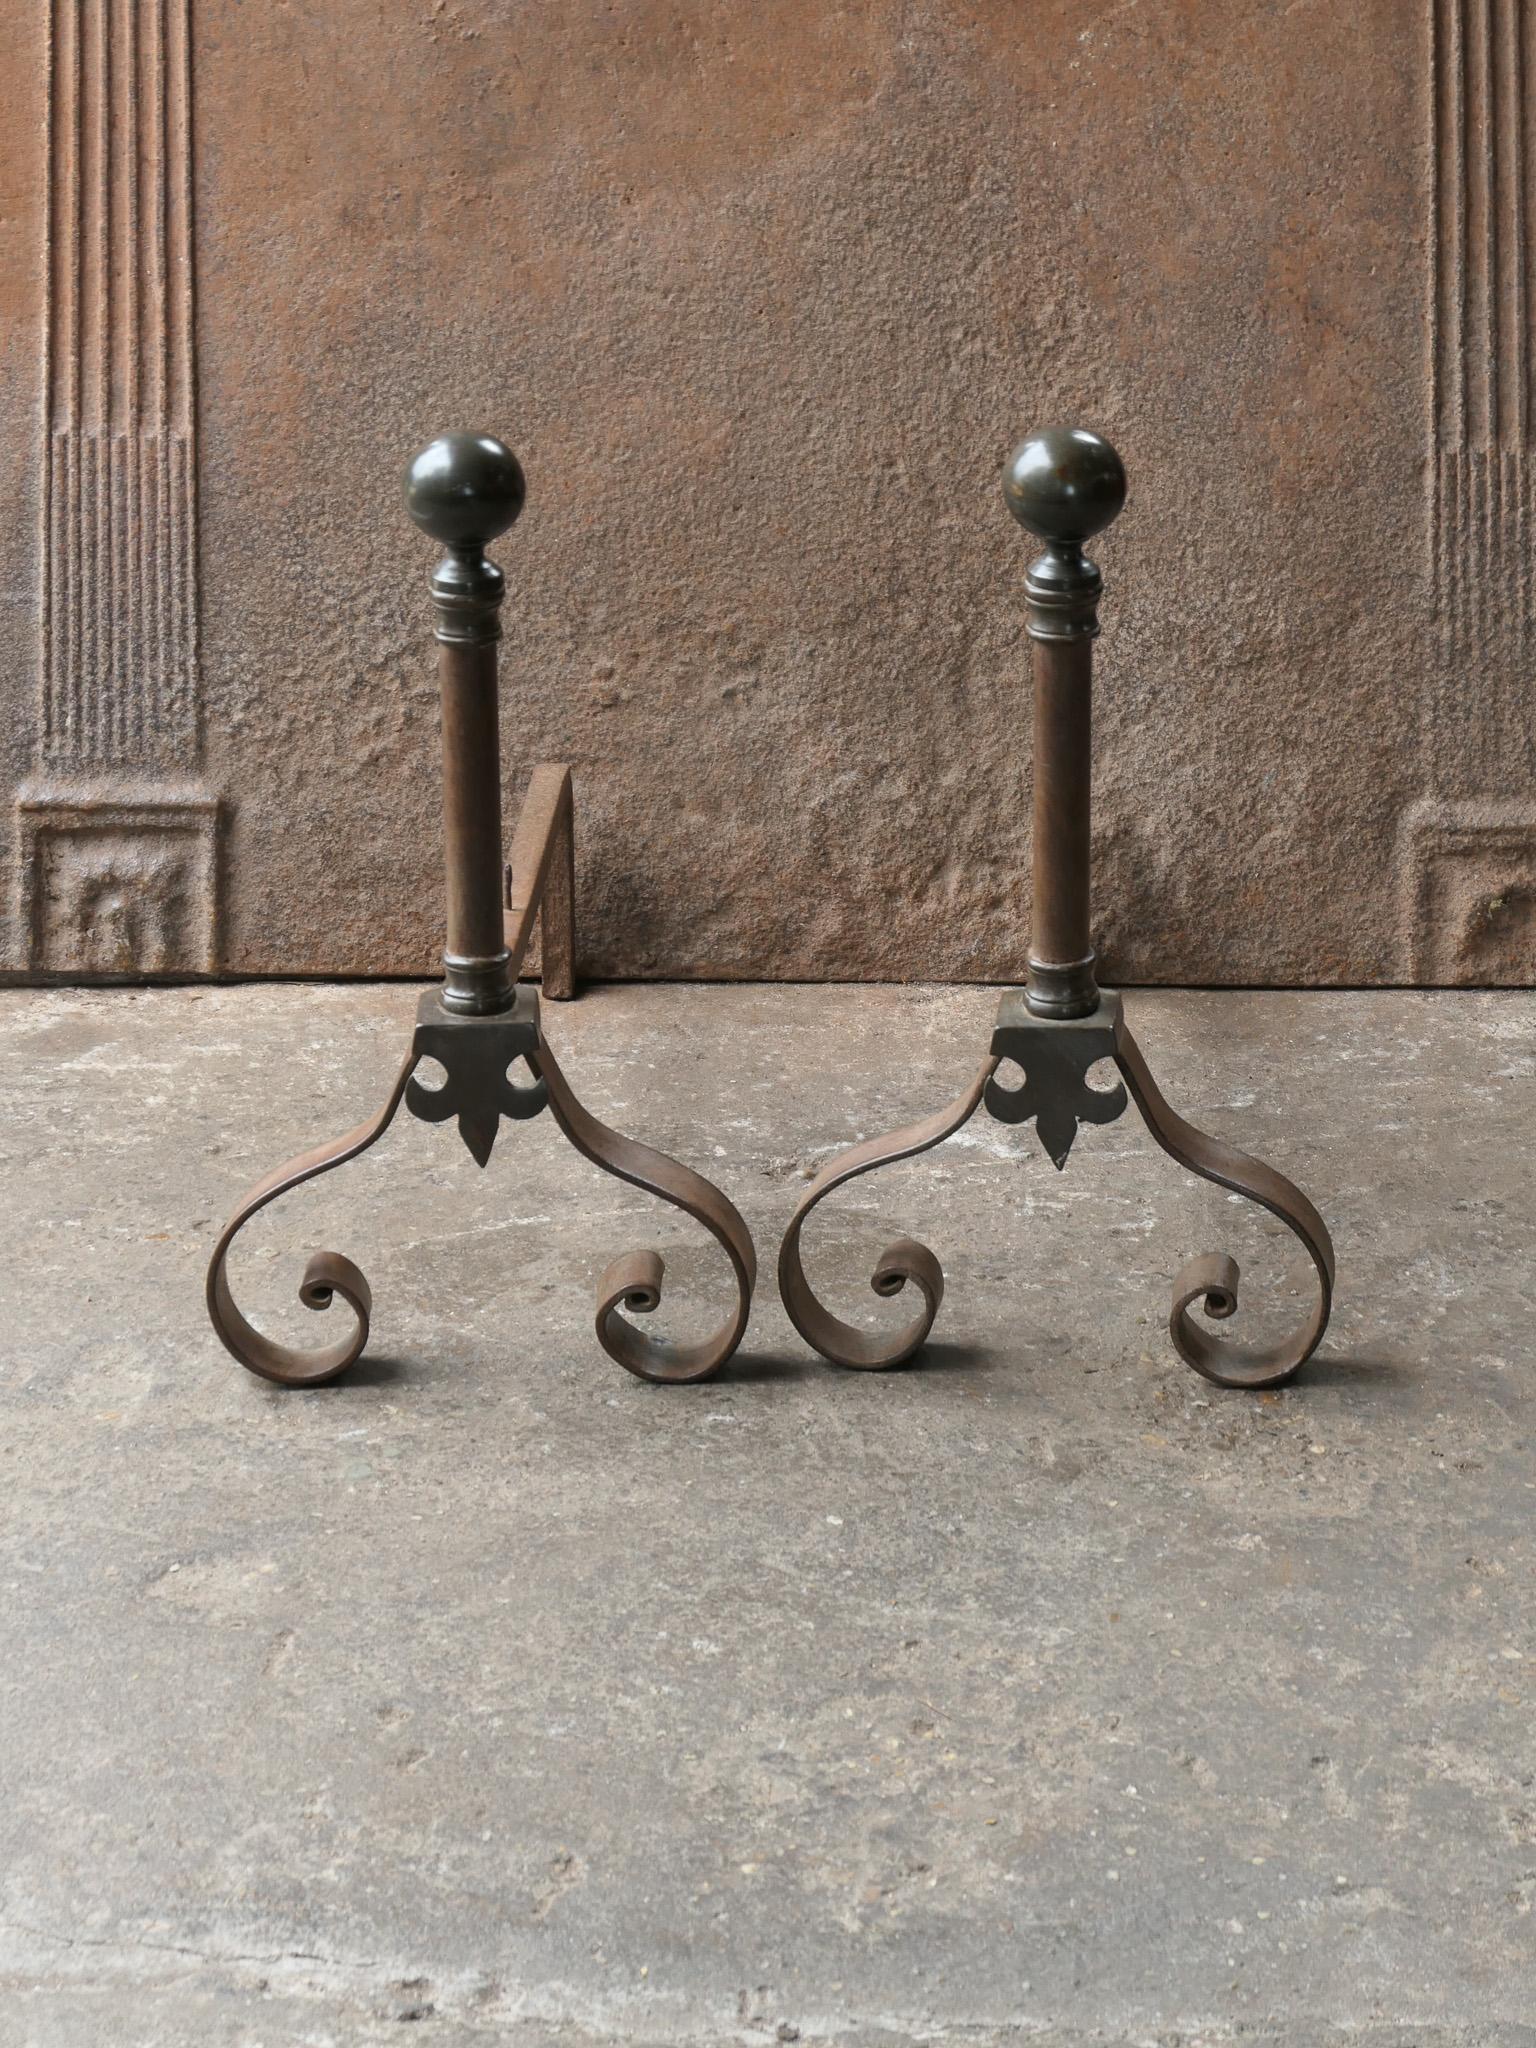 19th-20th century French Napoleon III style fireplace andirons or fire dogs, made of wrought iron and brass. The andirons are in a good condition and are fully functional.